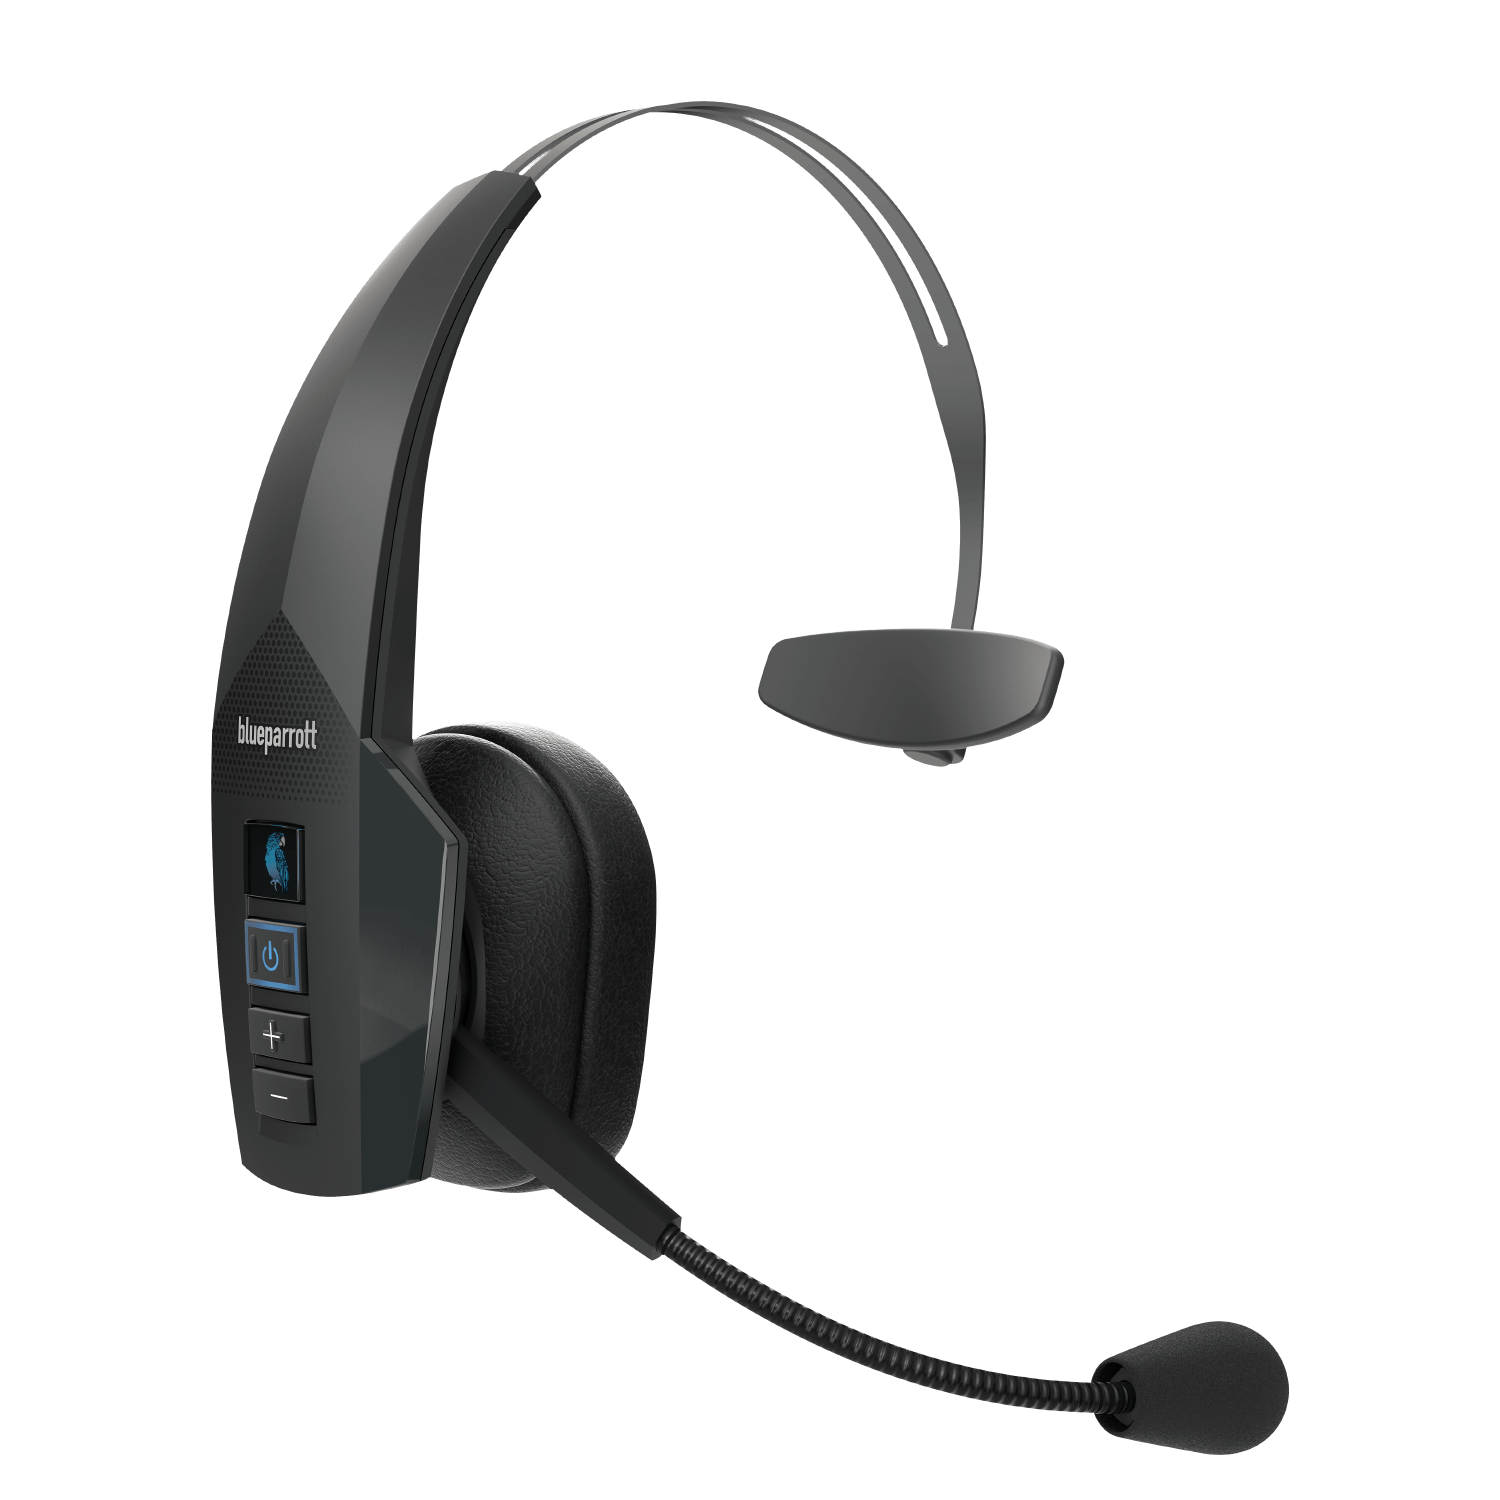 Industry Leading Sound and Comfort Renewed IP54-Rated Protection and Hands-Free Headset with Expanded Wireless Range BlueParrott B350-XT Noise Cancelling Bluetooth Headset 